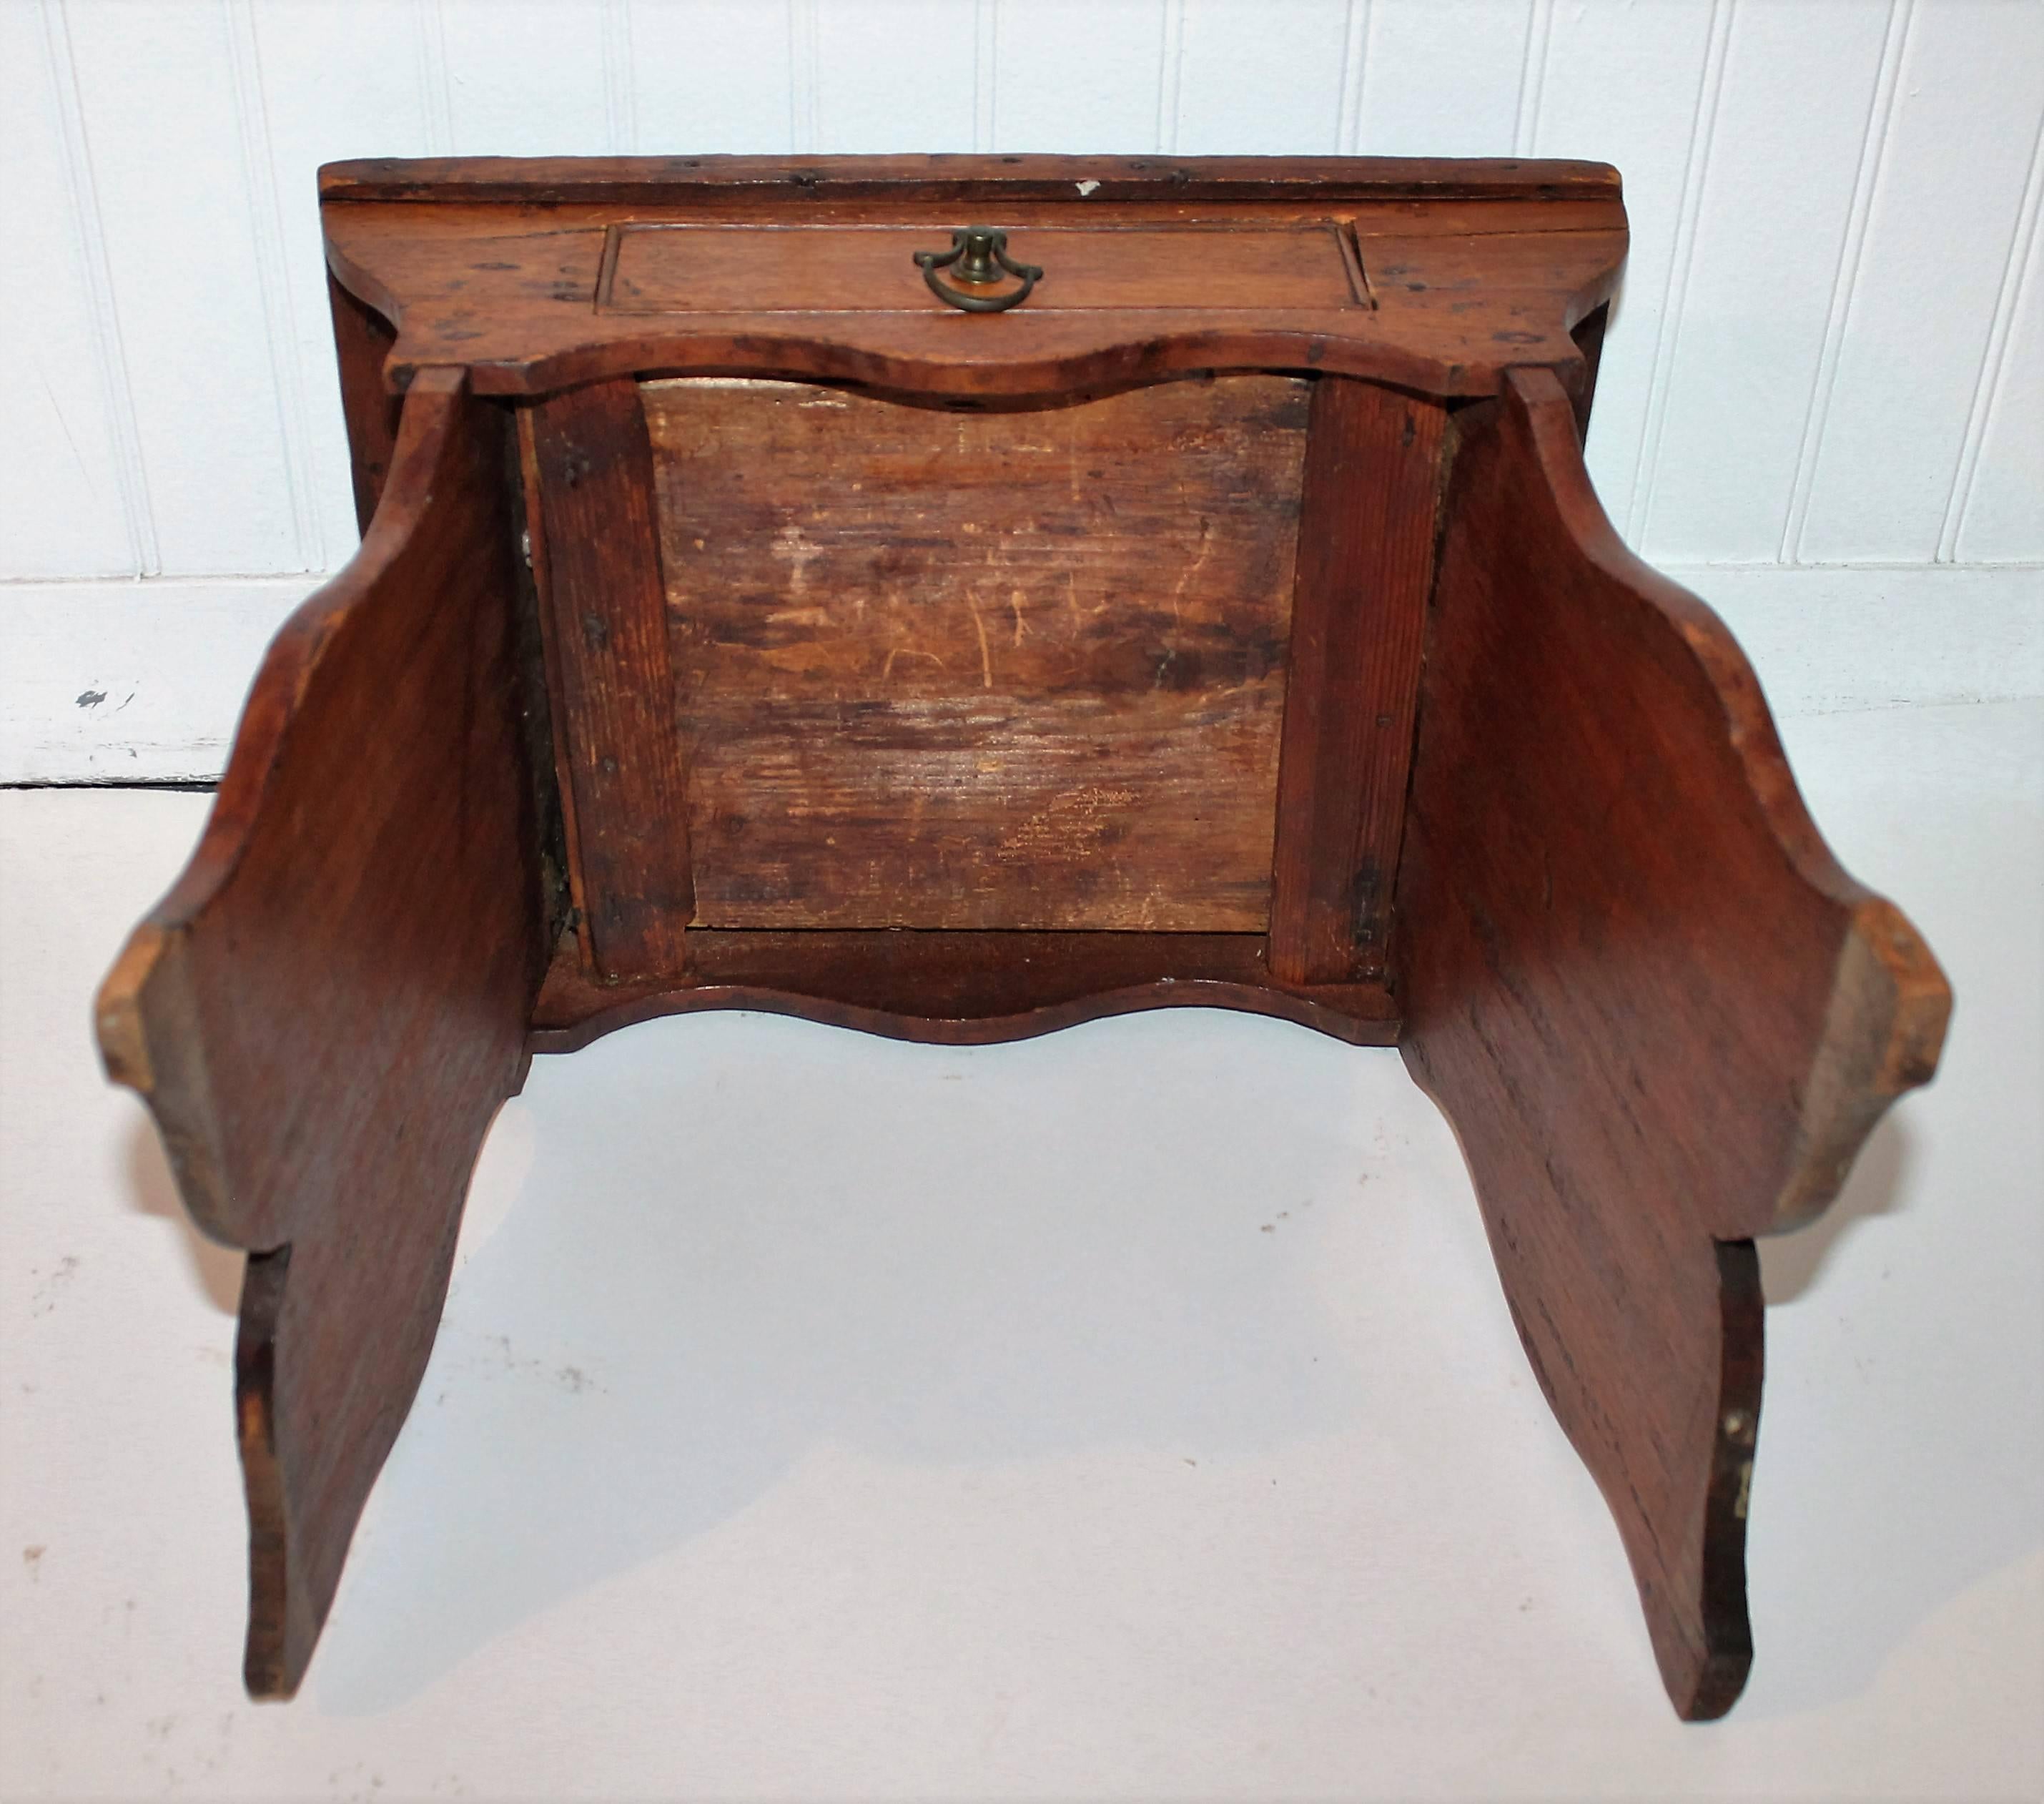 Hand-Crafted Early 19th Century New England Stool with Drawer